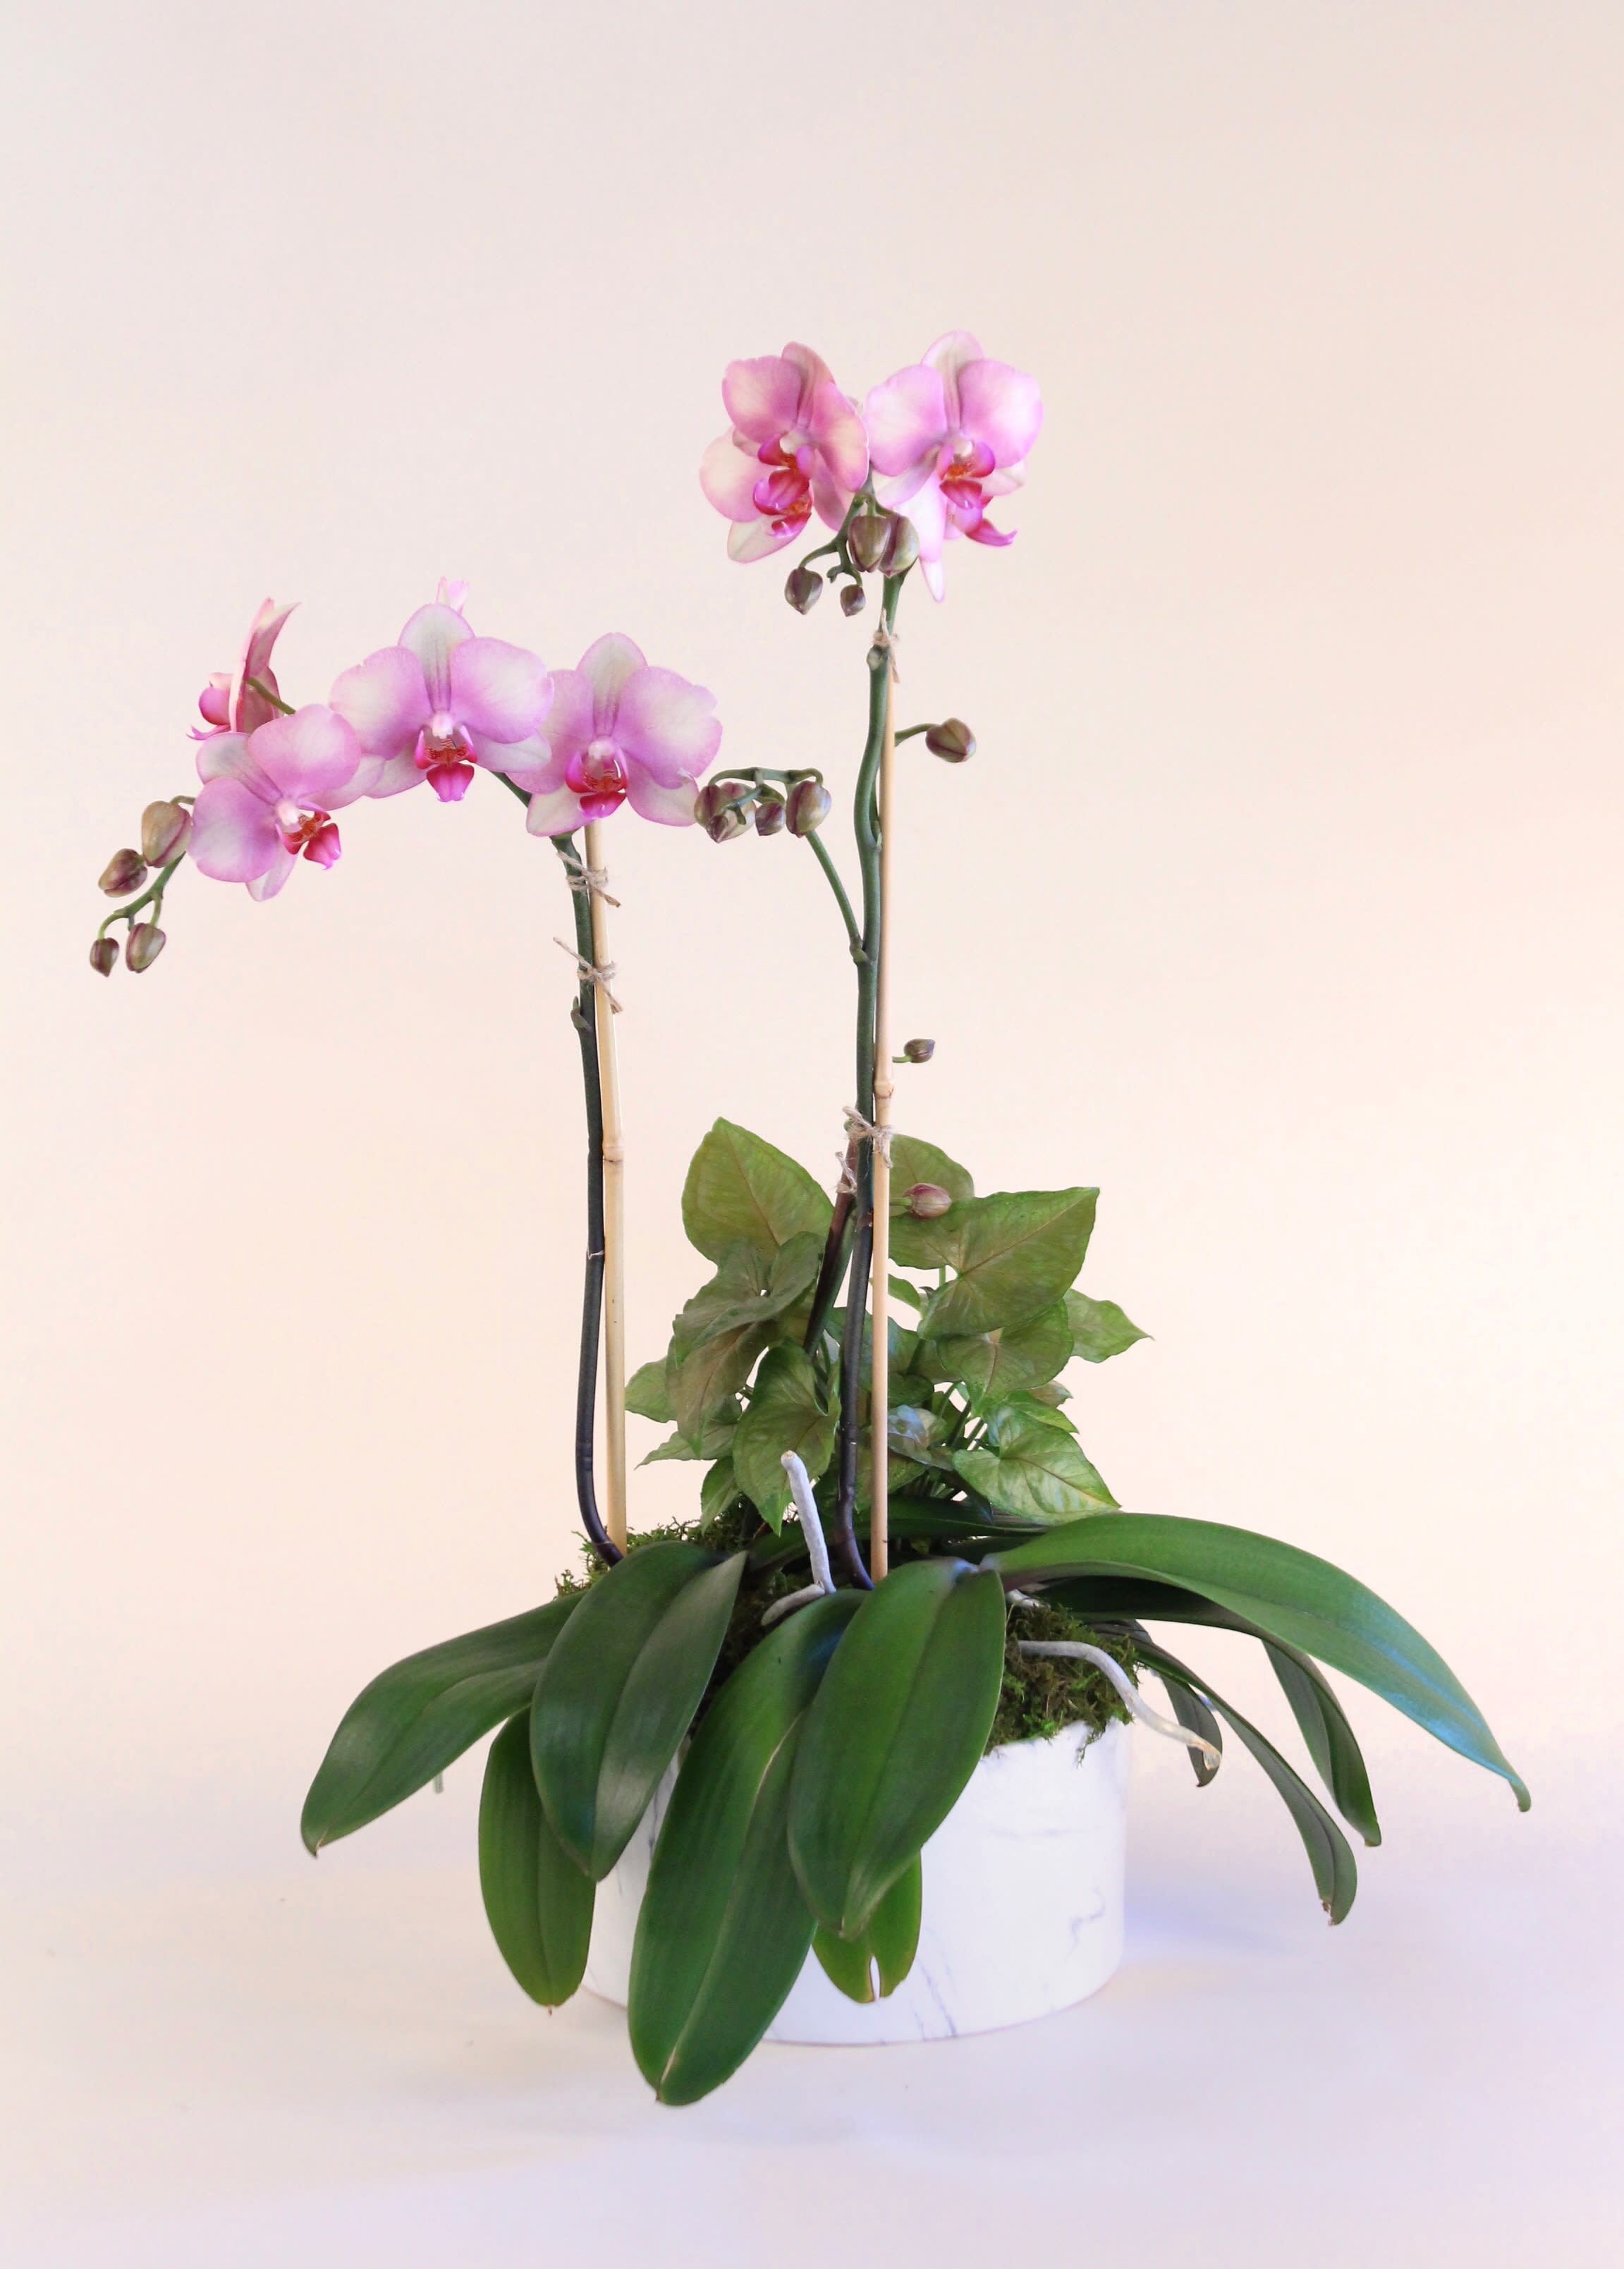 Pair of Phalaenopsis Orchid Plants - A pair of Phalaenopsis orchid plants presented in a marble ceramic pot accented with caladium plant and moss makes a great housewarming or &quot;Thank You&quot; gift.